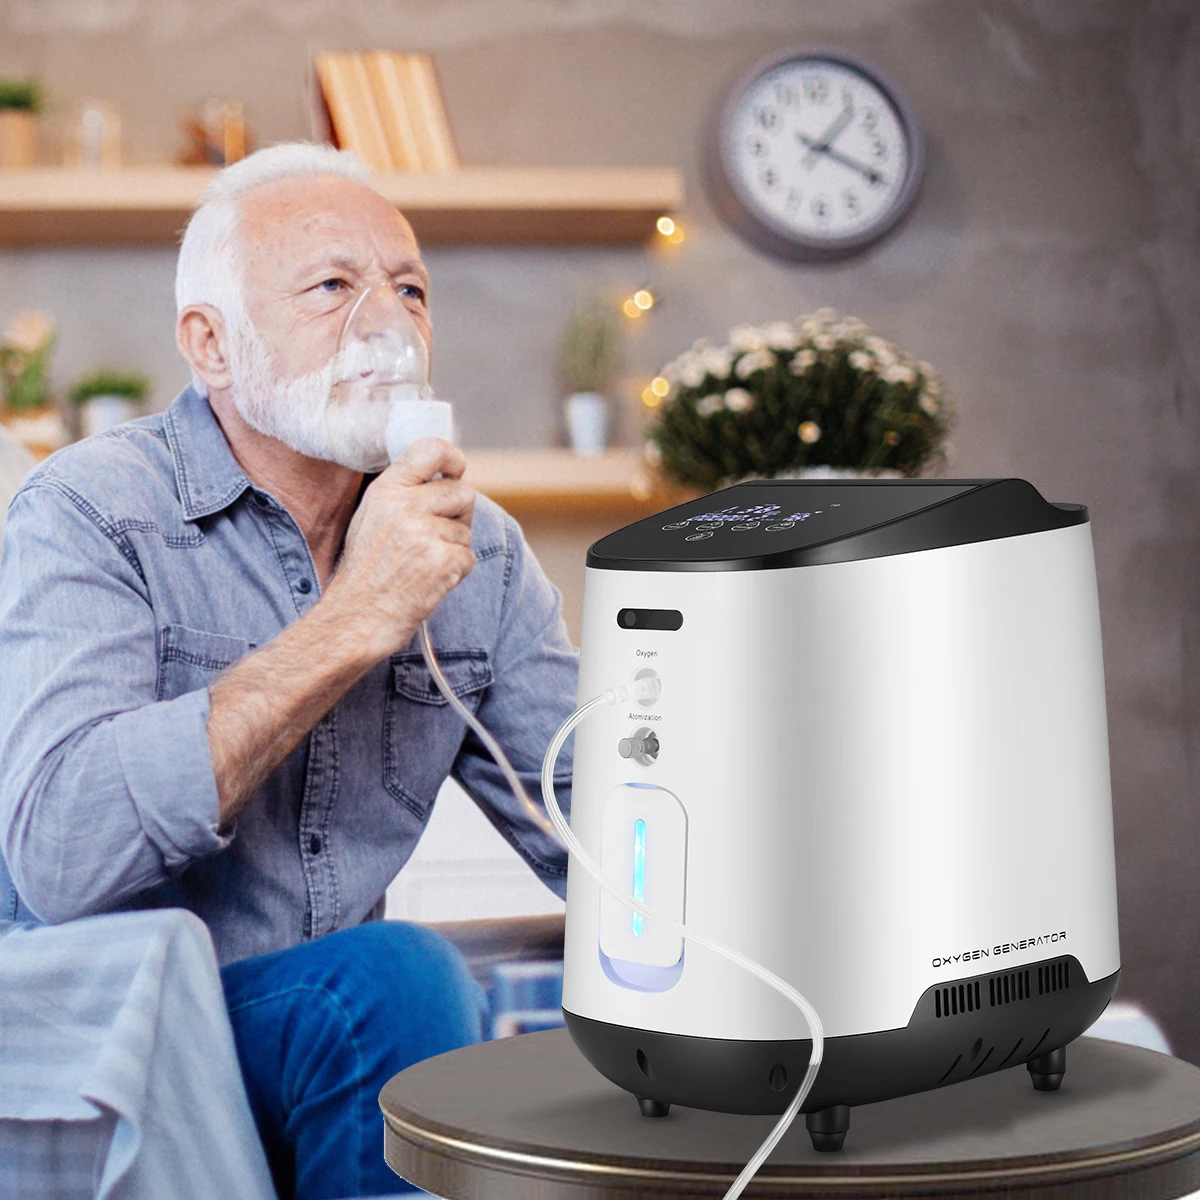 

VARON Oxygen Making Machine Portable Oxygen Concentrator Low Noise Oxygen Generator O2 Concentrator Home Travel Air Purifier